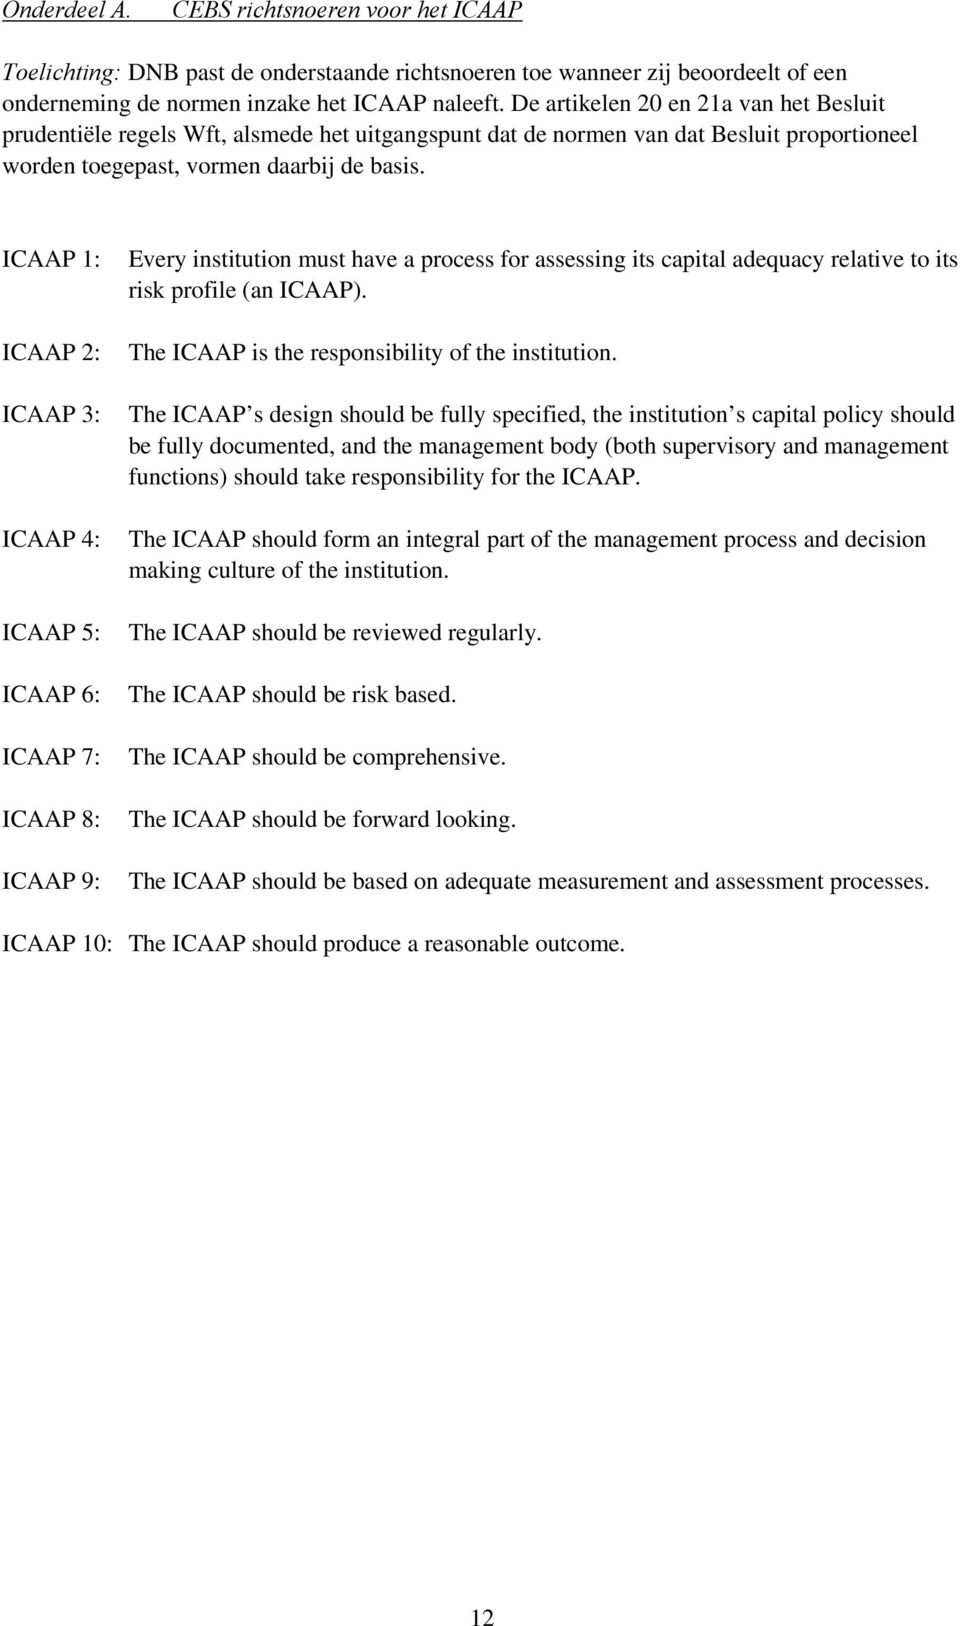 ICAAP 1: ICAAP 2: ICAAP 3: ICAAP 4: ICAAP 5: ICAAP 6: ICAAP 7: ICAAP 8: ICAAP 9: Every institution must have a process for assessing its capital adequacy relative to its risk profile (an ICAAP).